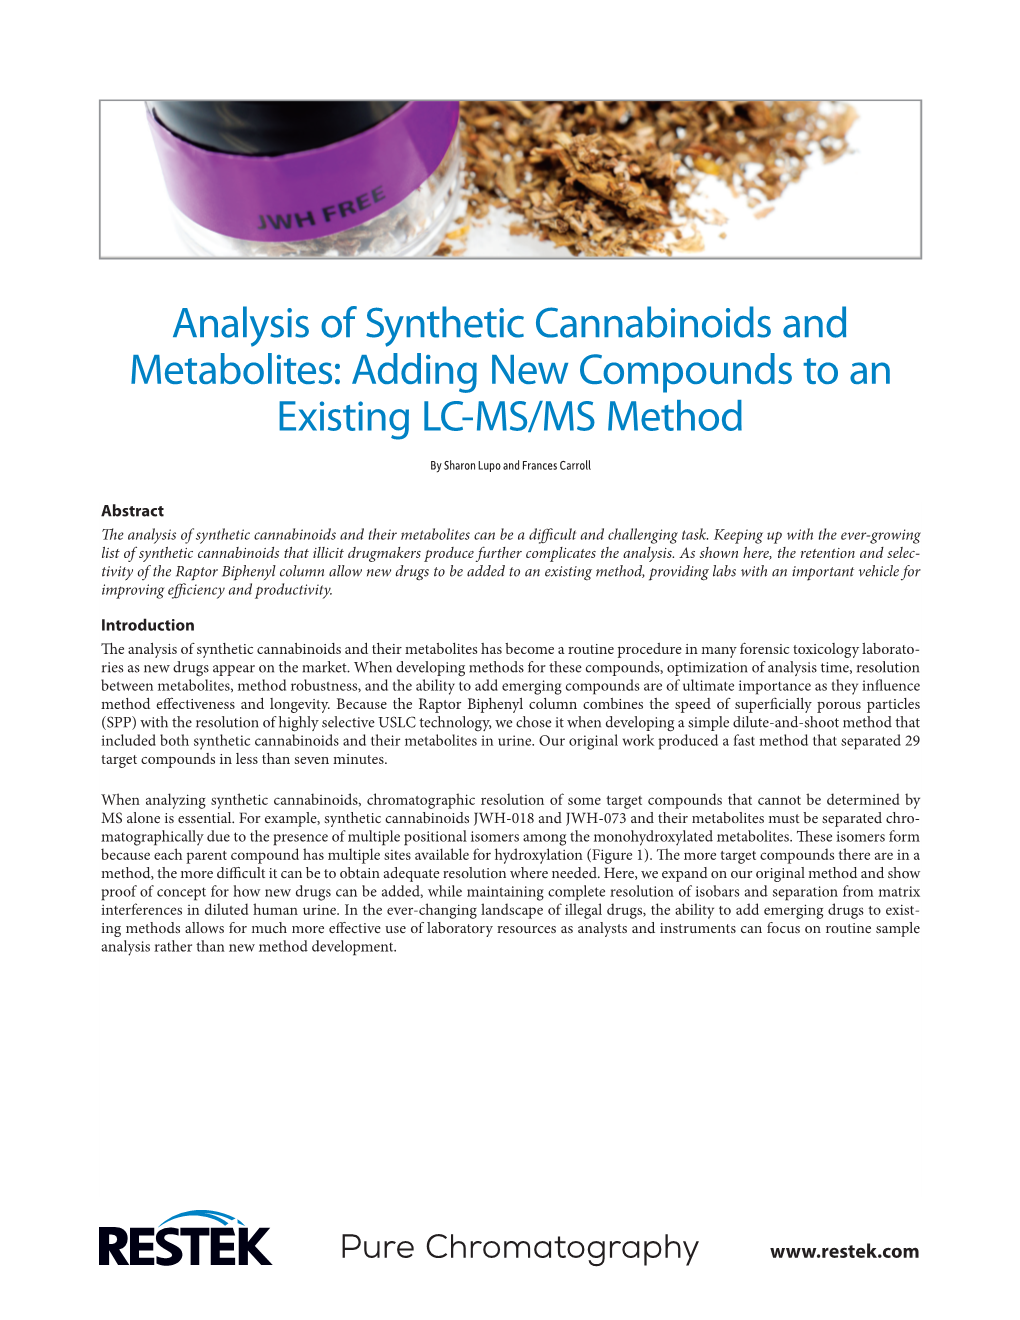 Analysis of Synthetic Cannabinoids and Metabolites: Adding New Compounds to an Existing LC-MS/MS Method